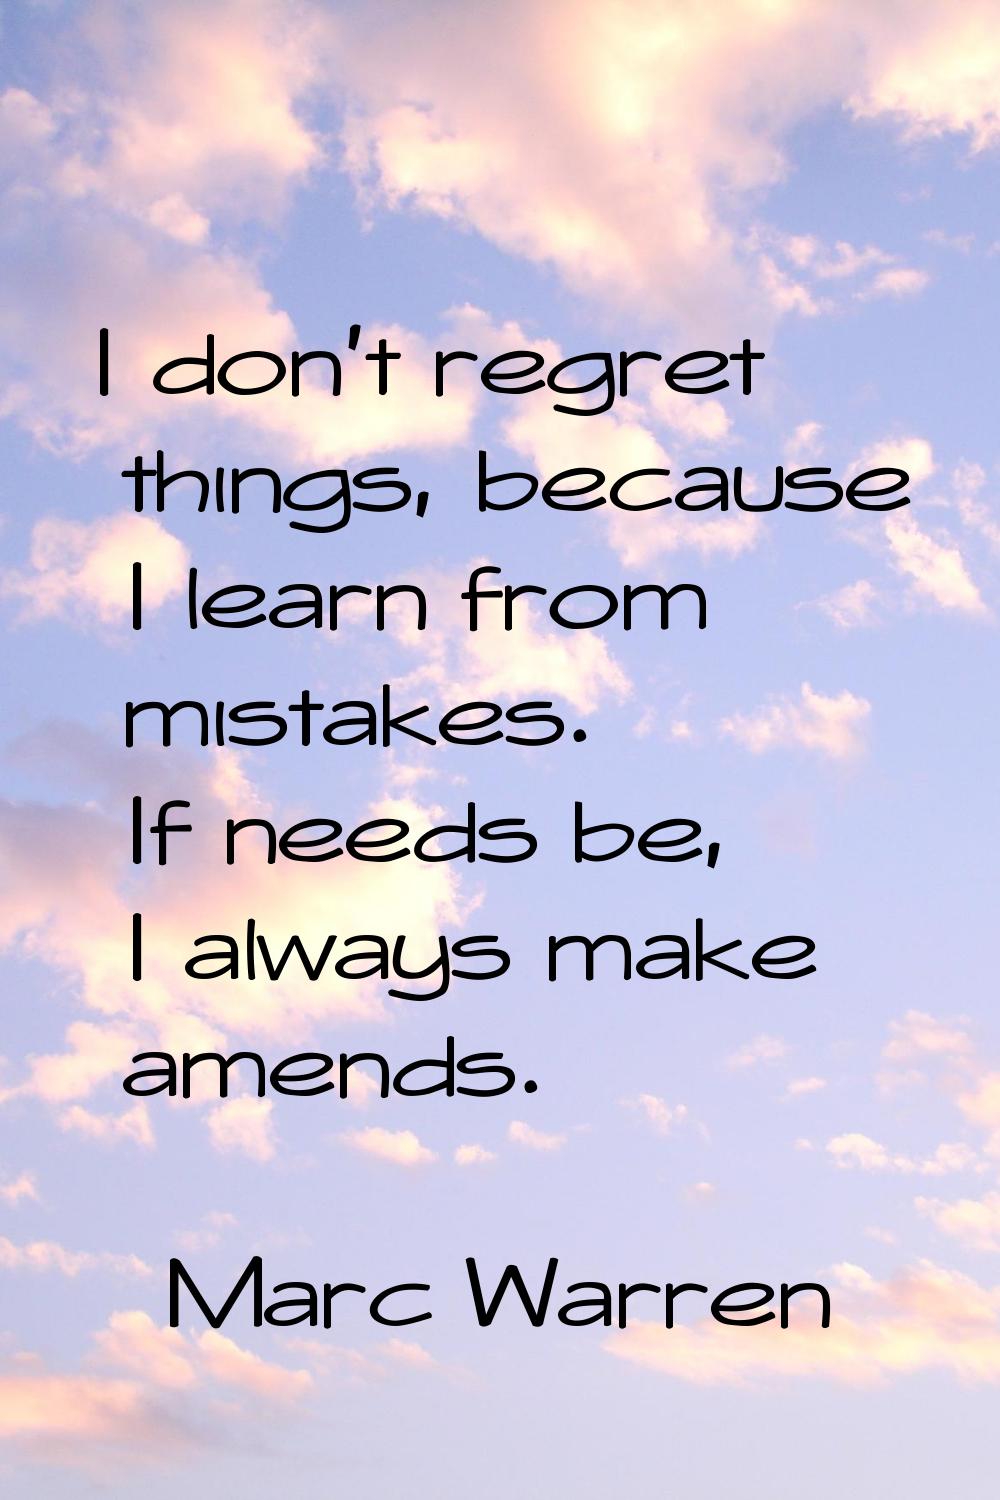 I don't regret things, because I learn from mistakes. If needs be, I always make amends.